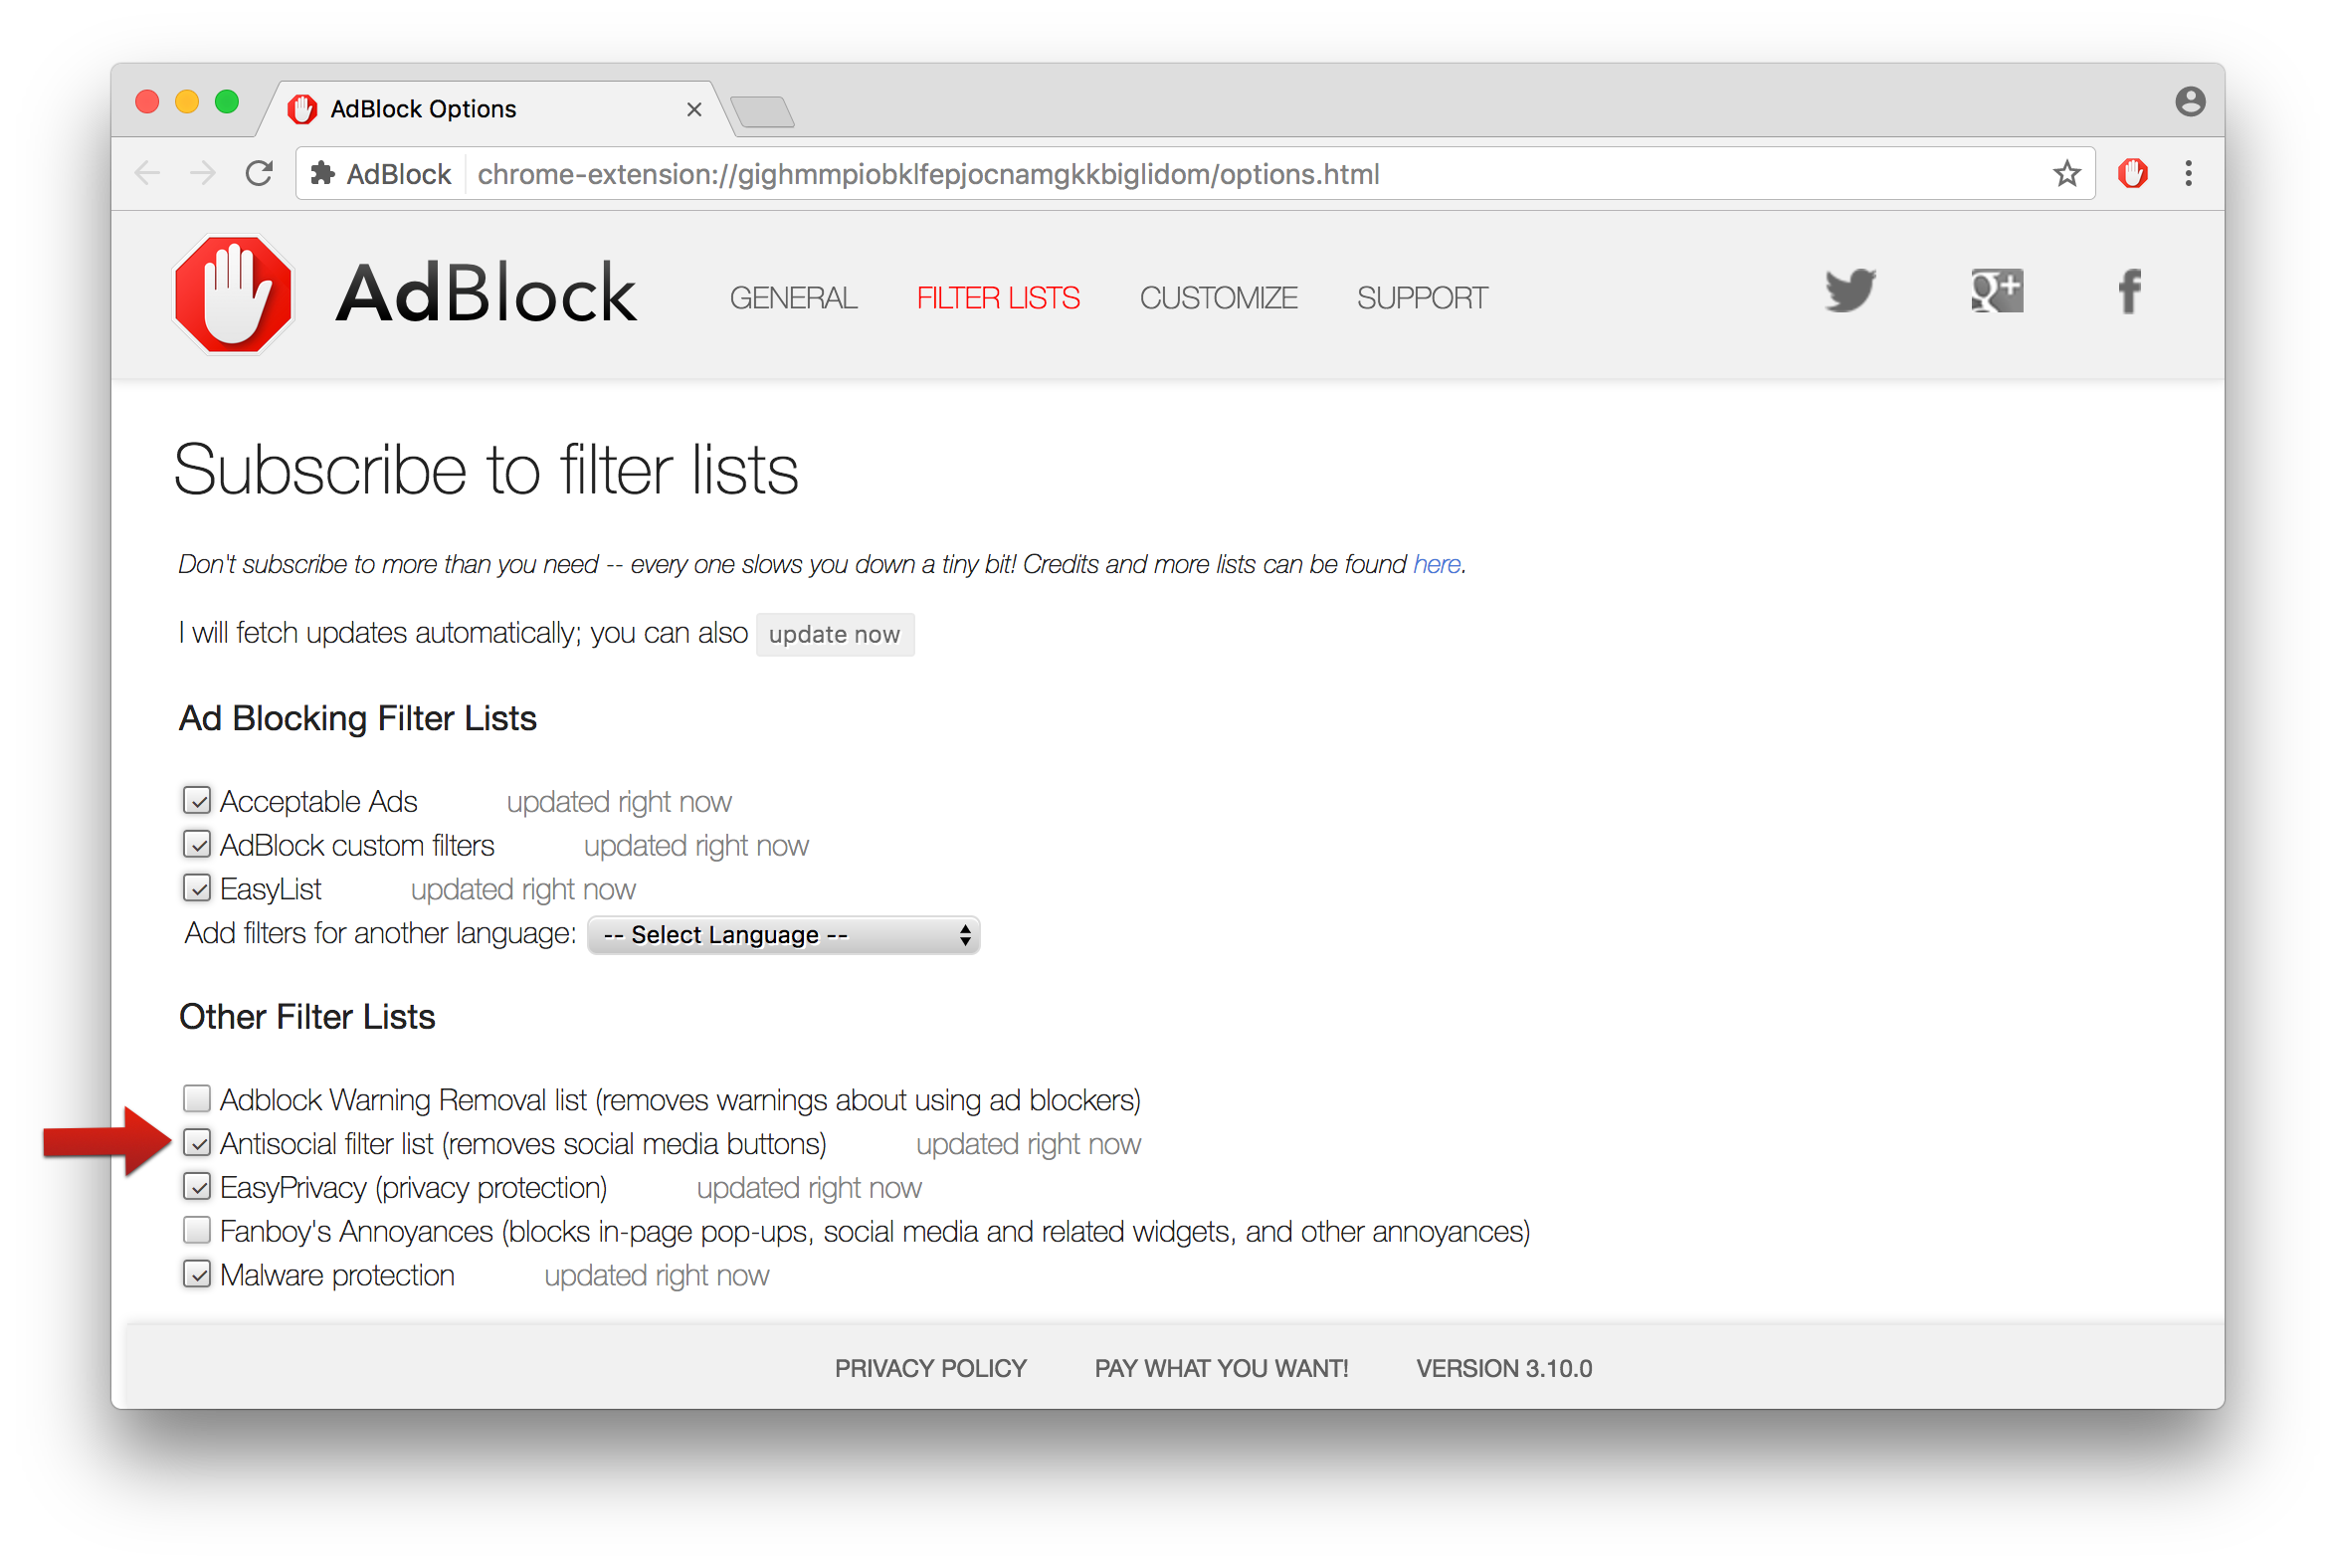 How to Make the Most of AdBlock - AdBlock's Blog